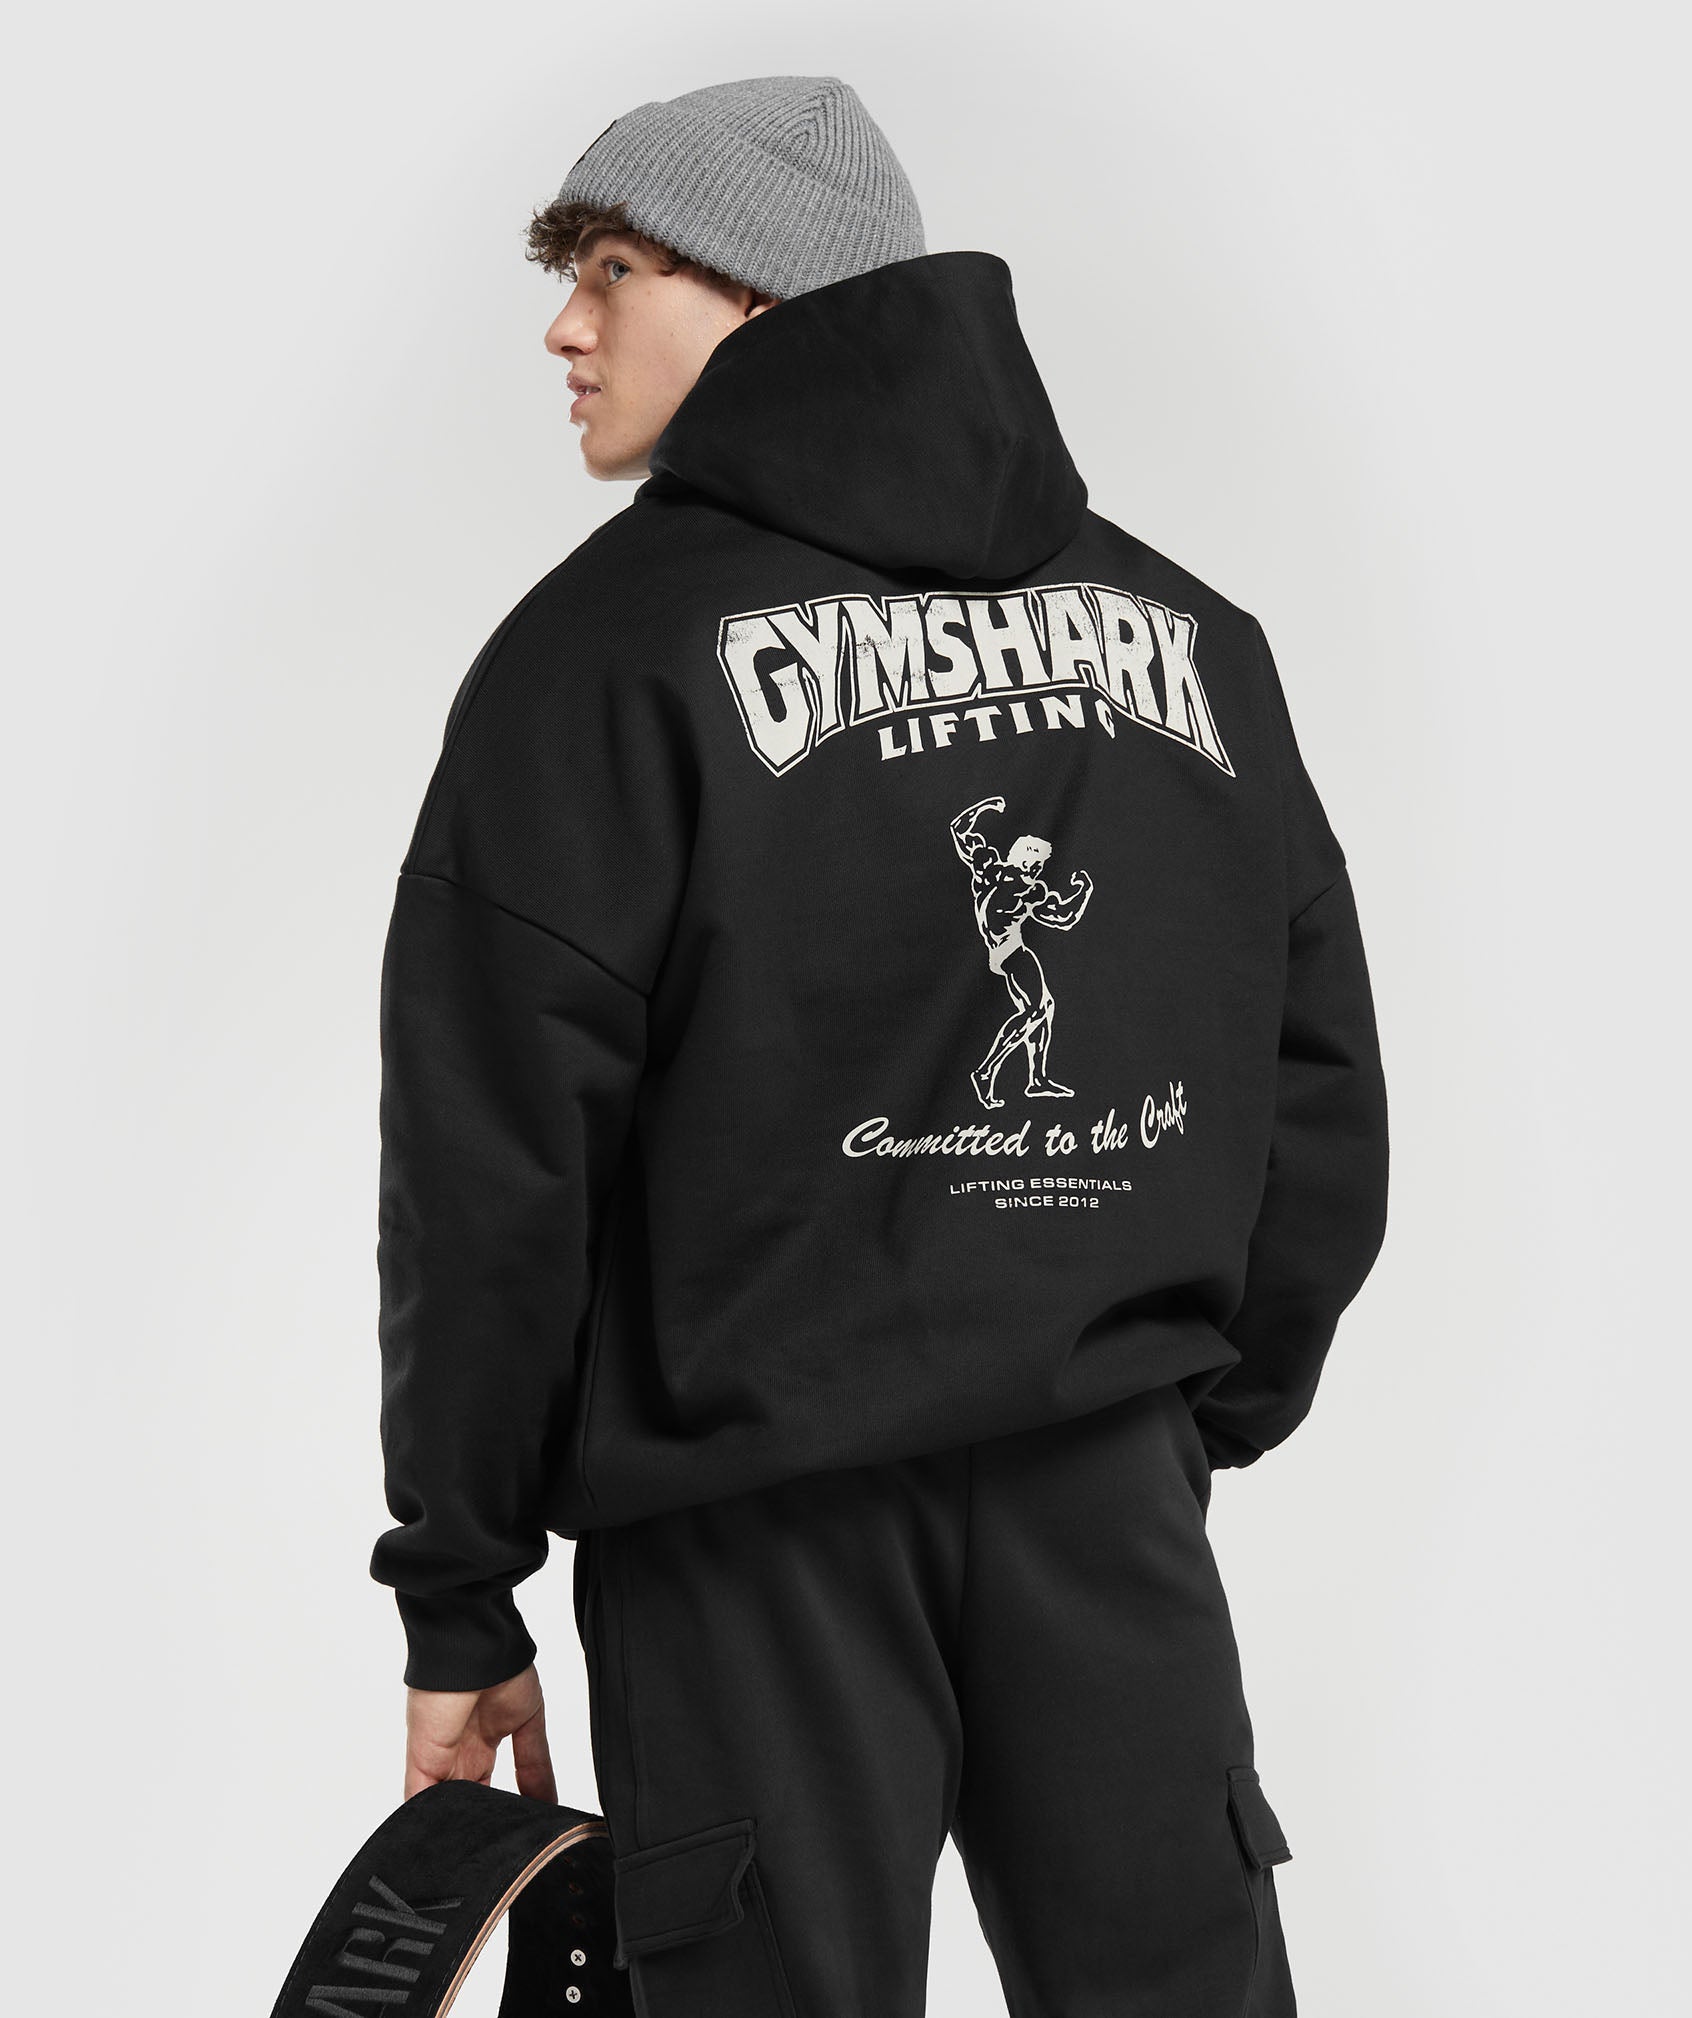 Committed to the Craft Hoodie in Black - view 6